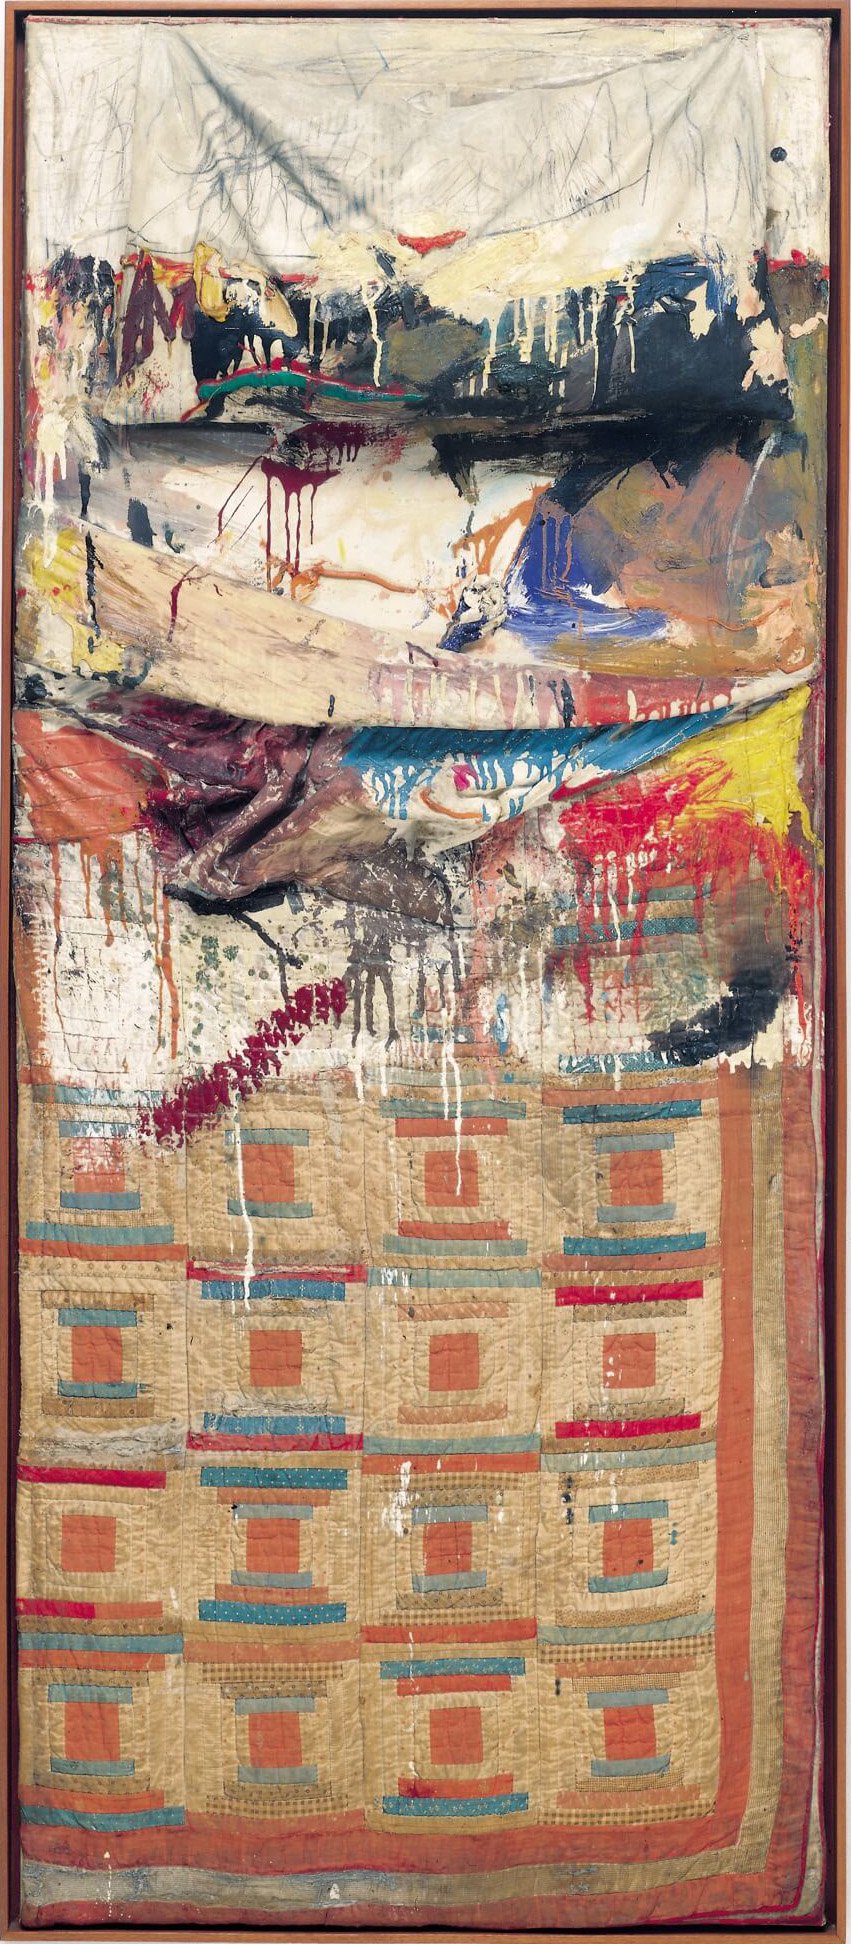 “Bed” by Robert Rauschenberg is an abstract artwork resembling a made bed hanging on a wall with one corner untucked. There are doodles and drippings of colorful paint splashed on the bedding. Various real-world objects, including a pillow and a quilt, are attached to the canvas.